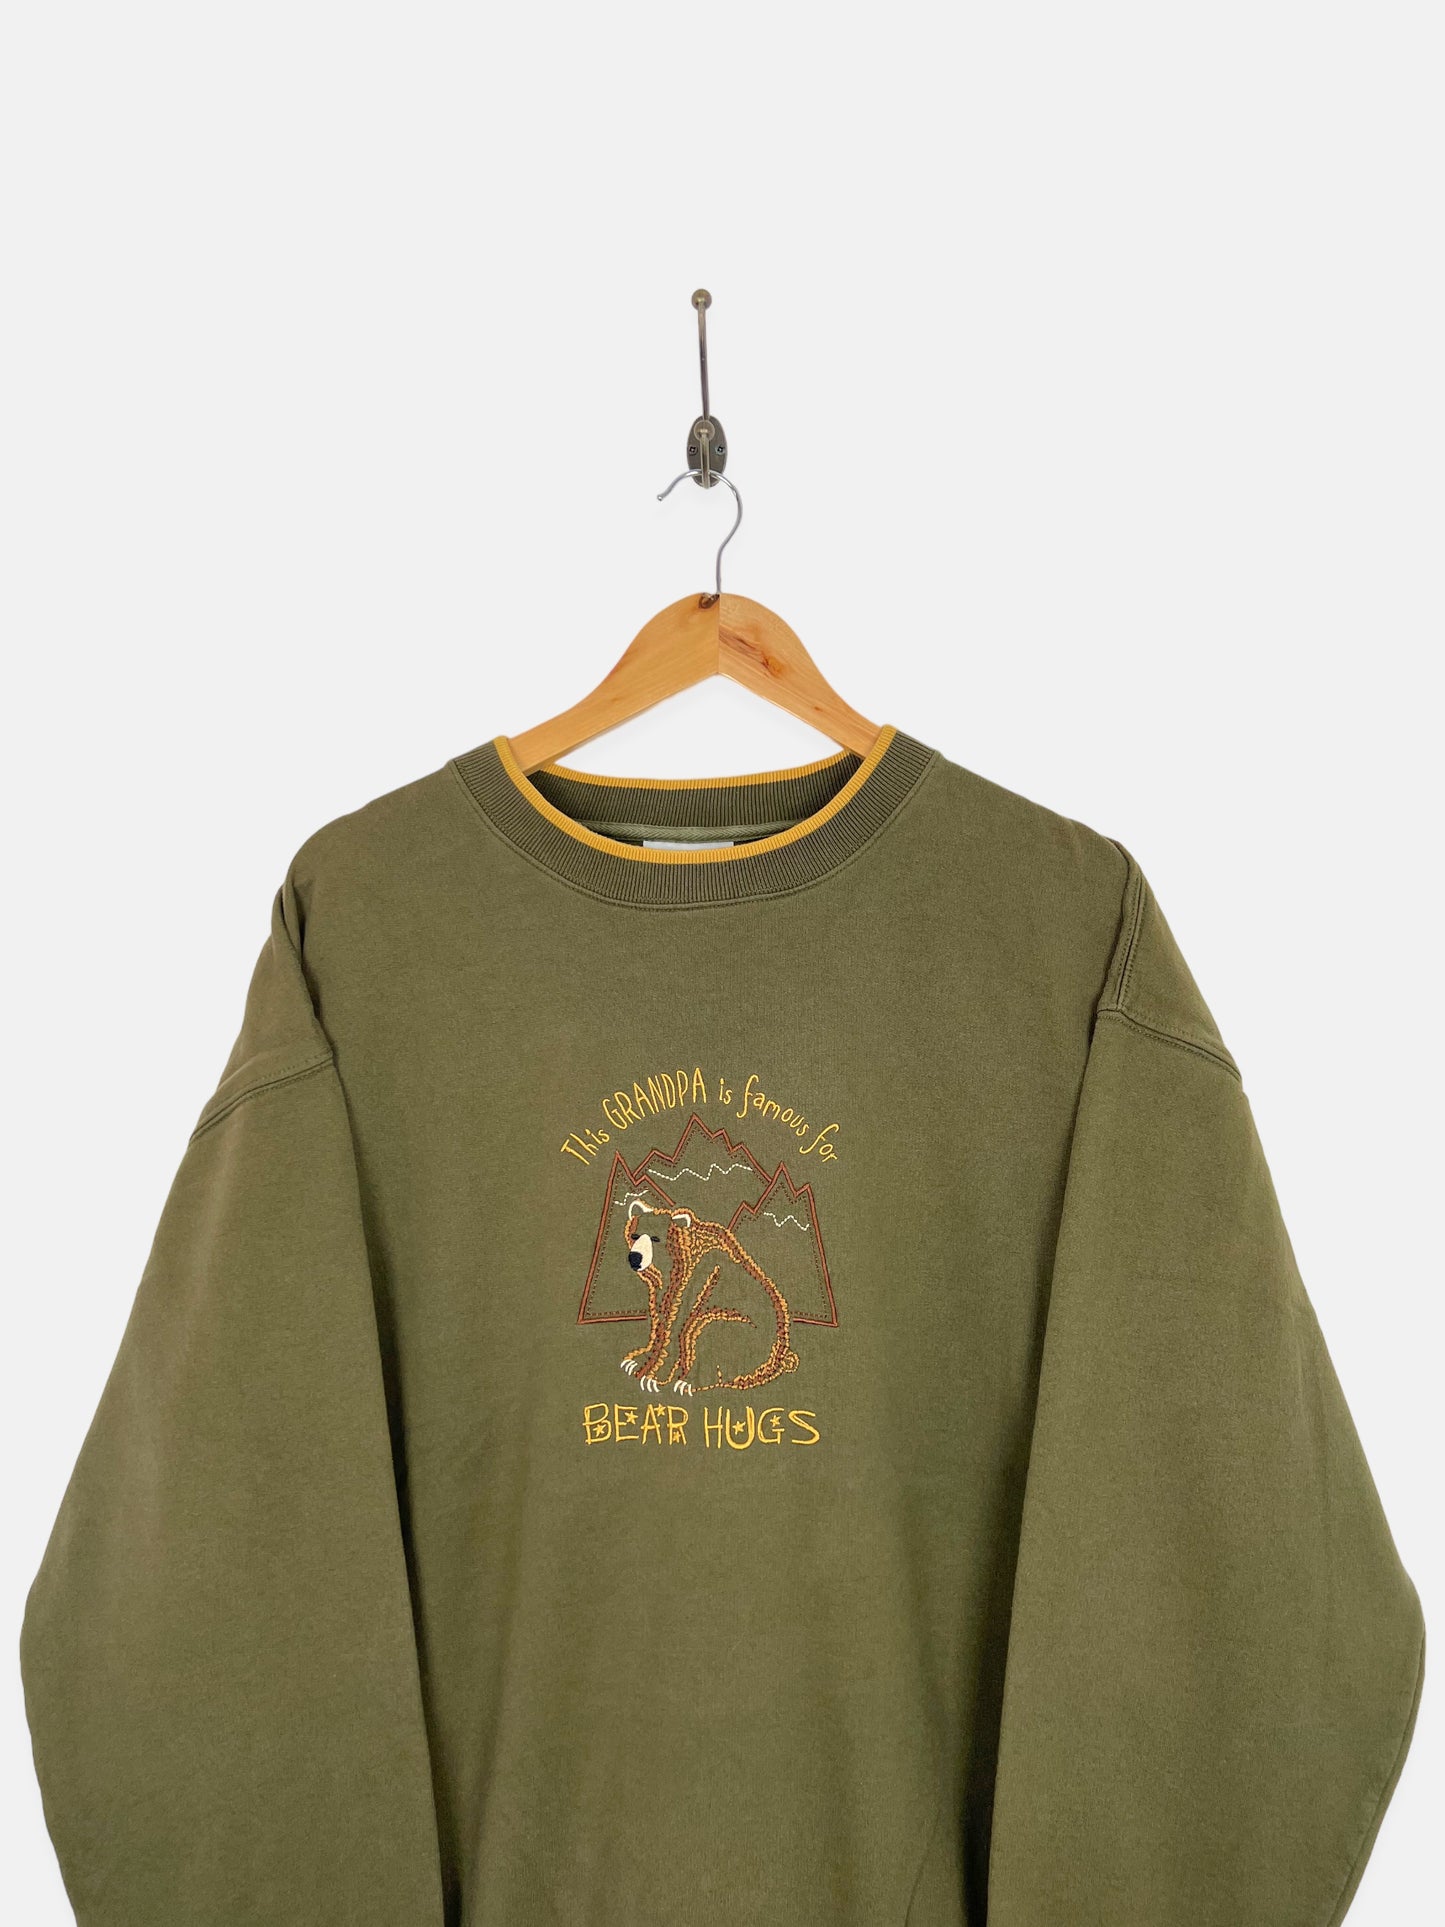 90's 'This Grandpa Is Famous For Bear Hugs' Embroidered Vintage Sweatshirt Size XL